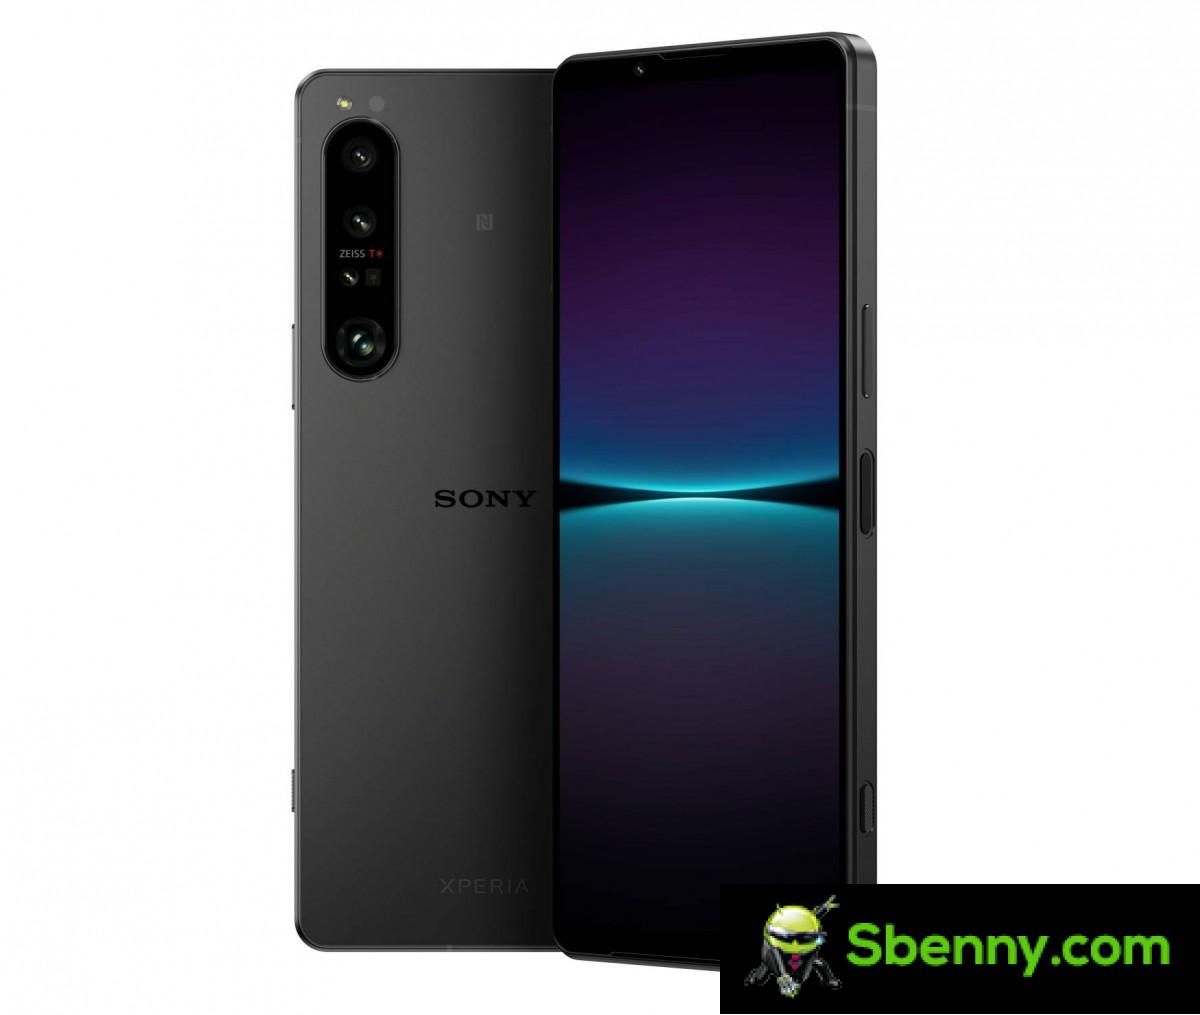 Sony Xperia 1 IV presented with the revolutionary continuous zoom camera